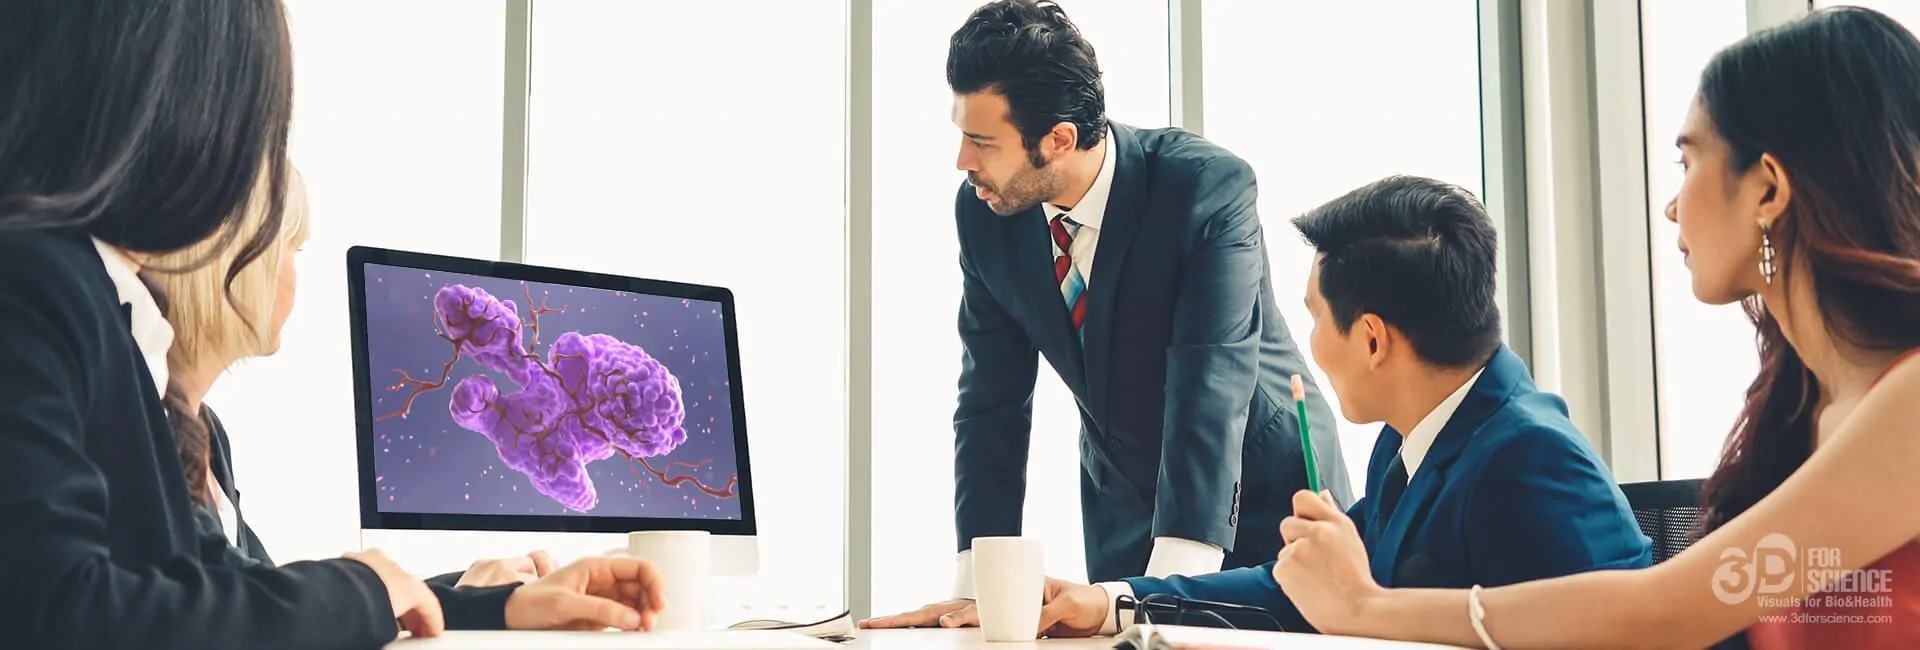 man in a meeting watching a medical animation